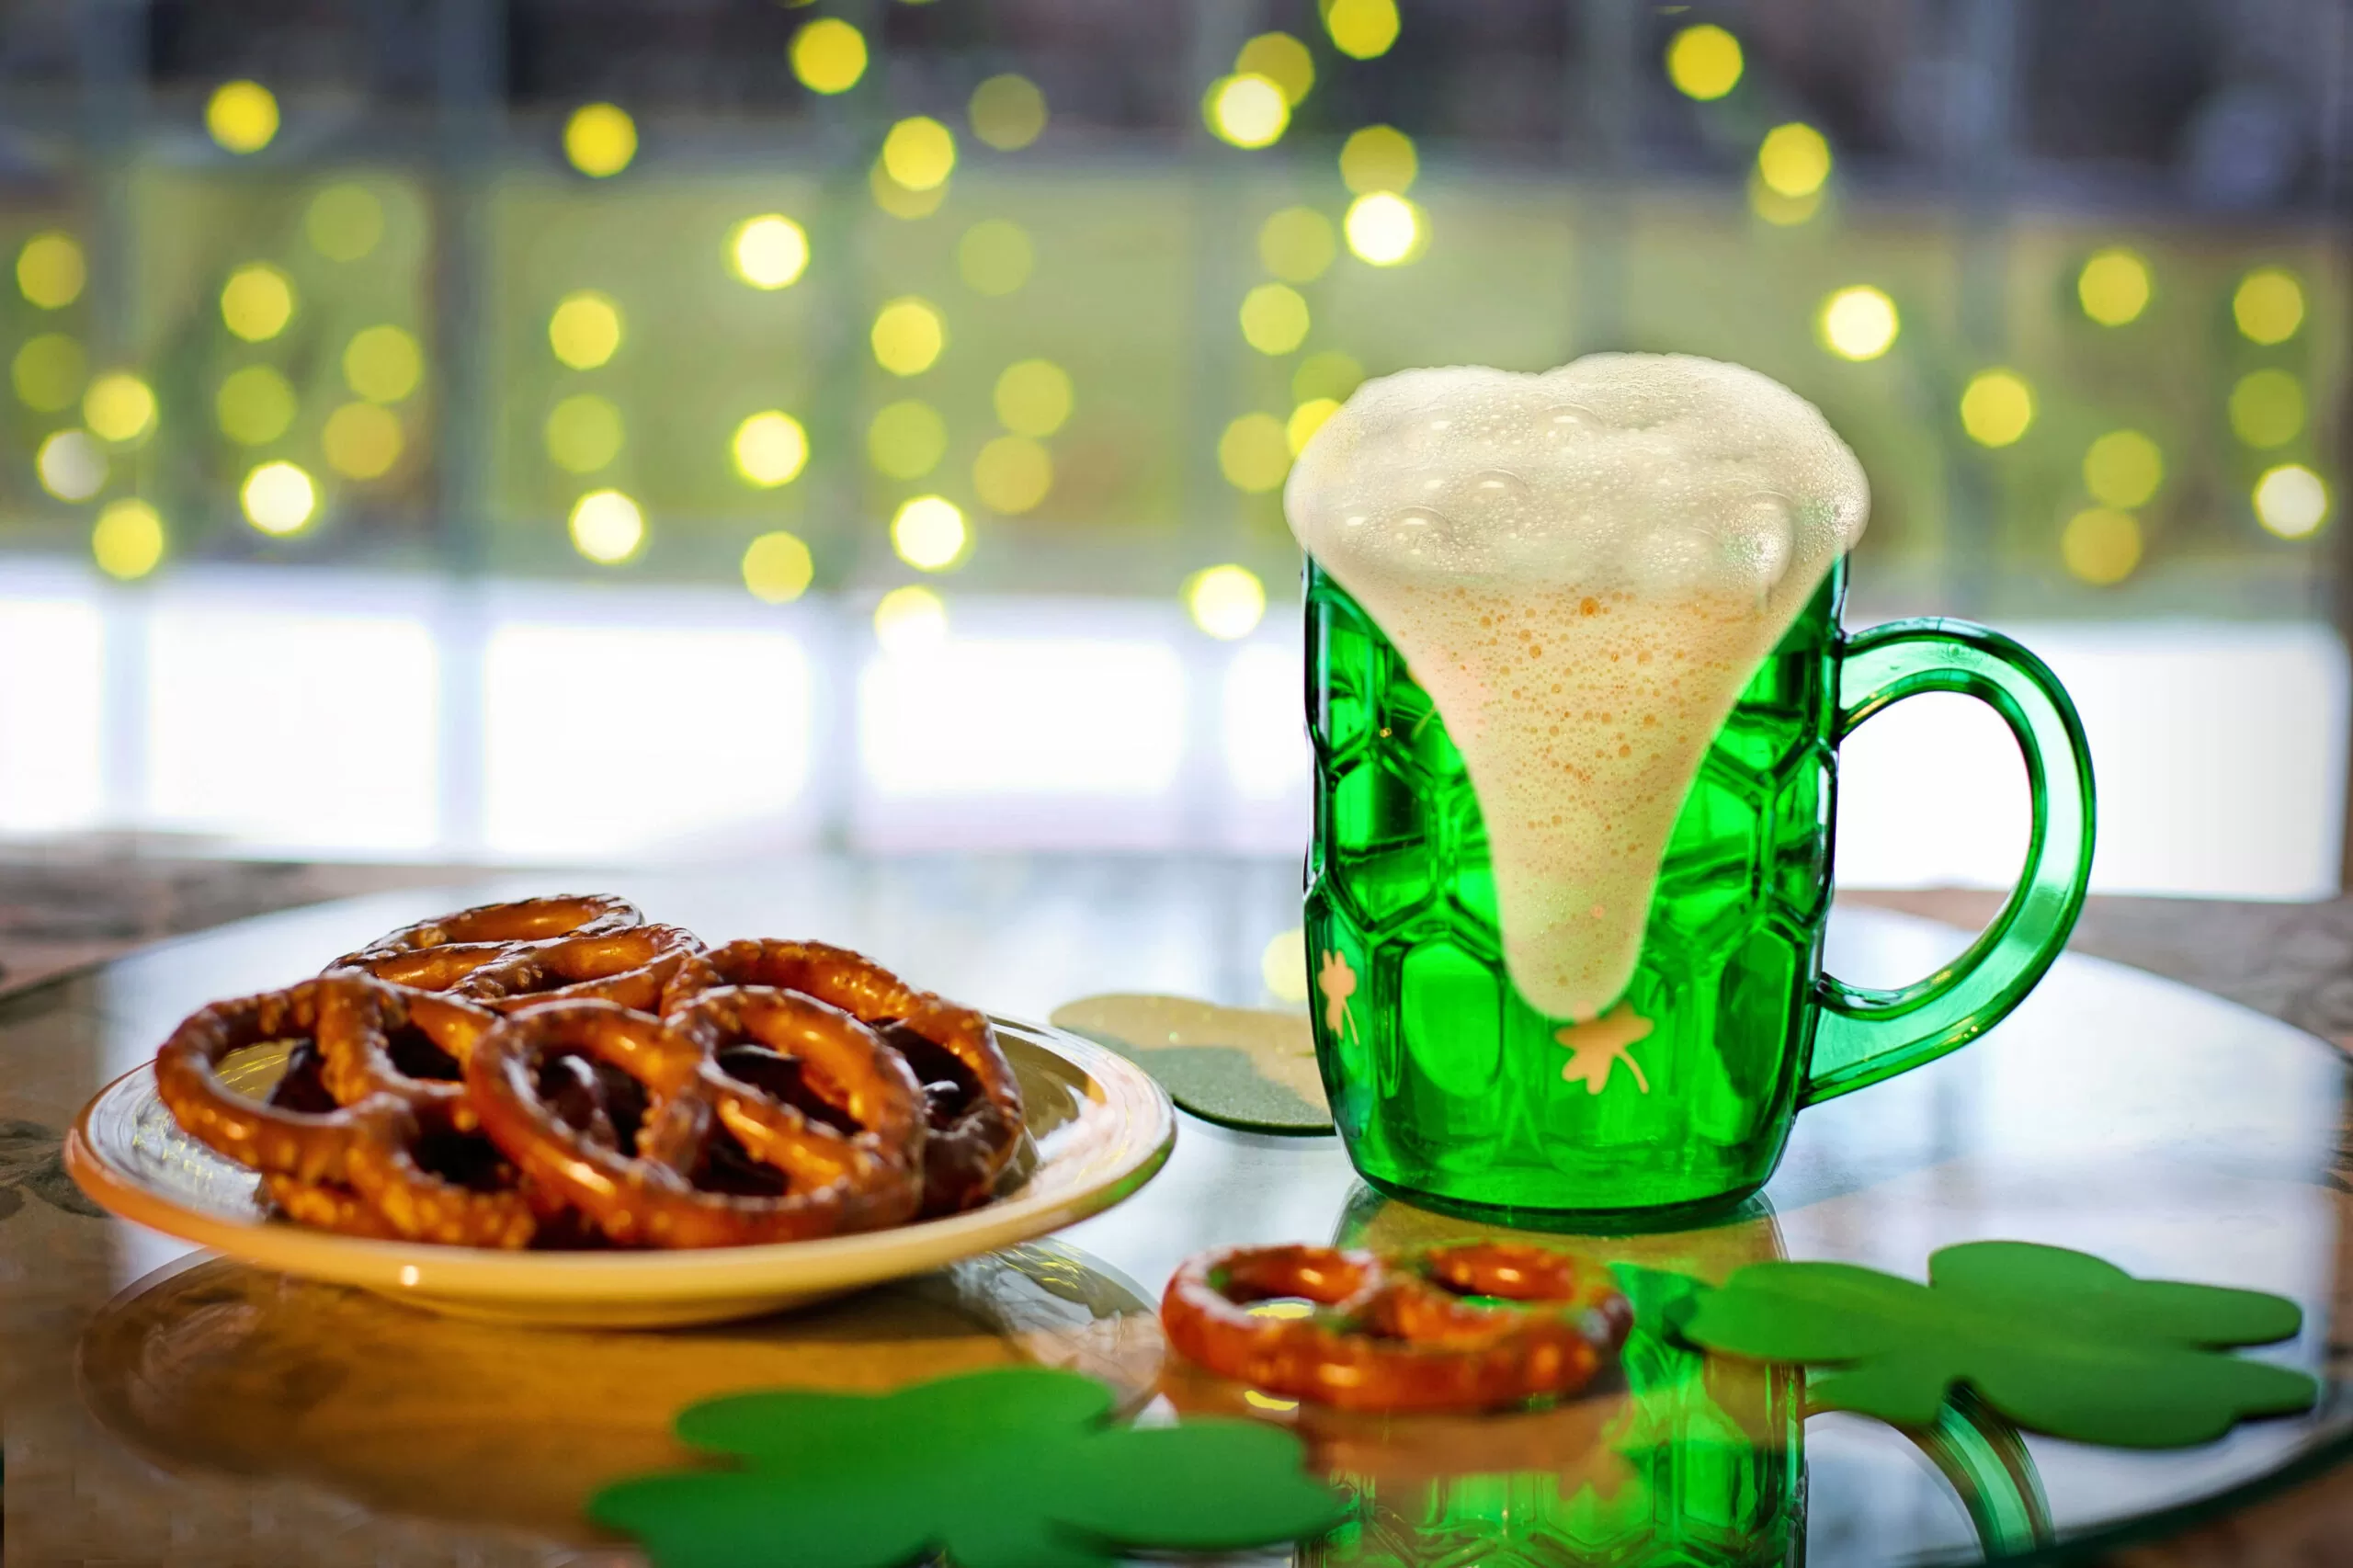 Pretzels and Beer for St Patrick's Day